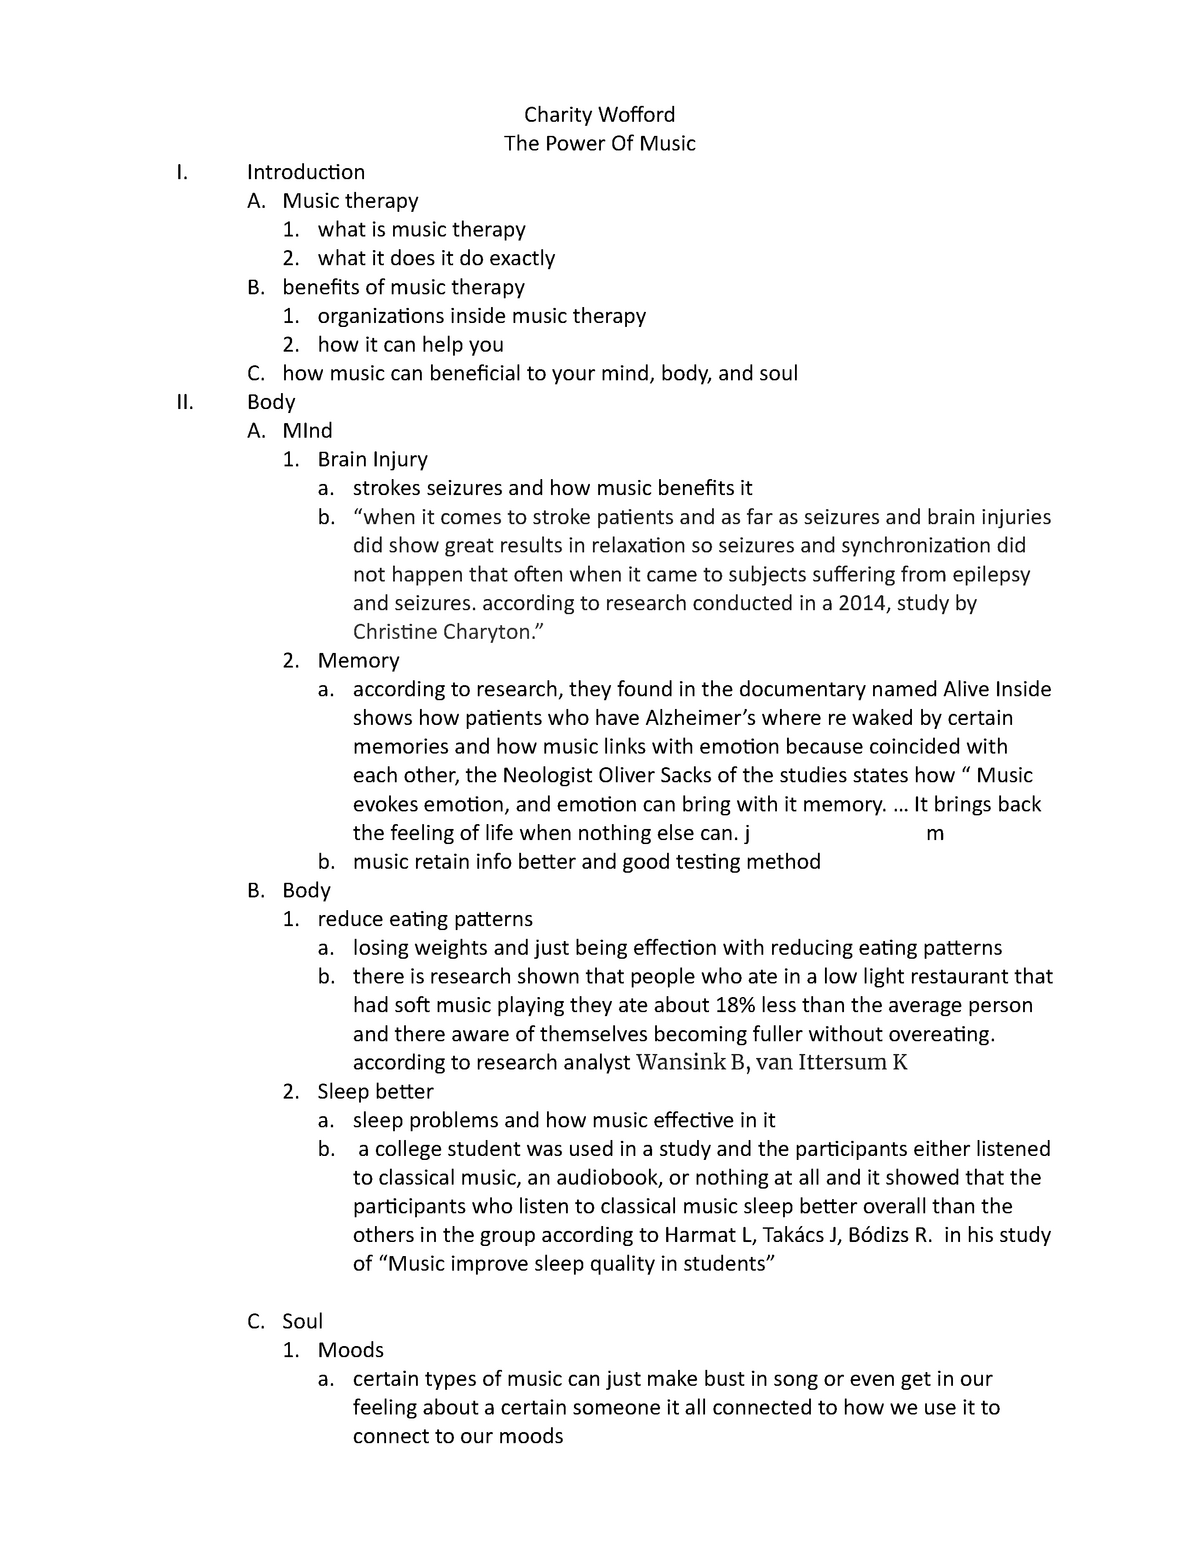 Sample Speech Outline (2) - Charity Wofford The Power Of Music I ...